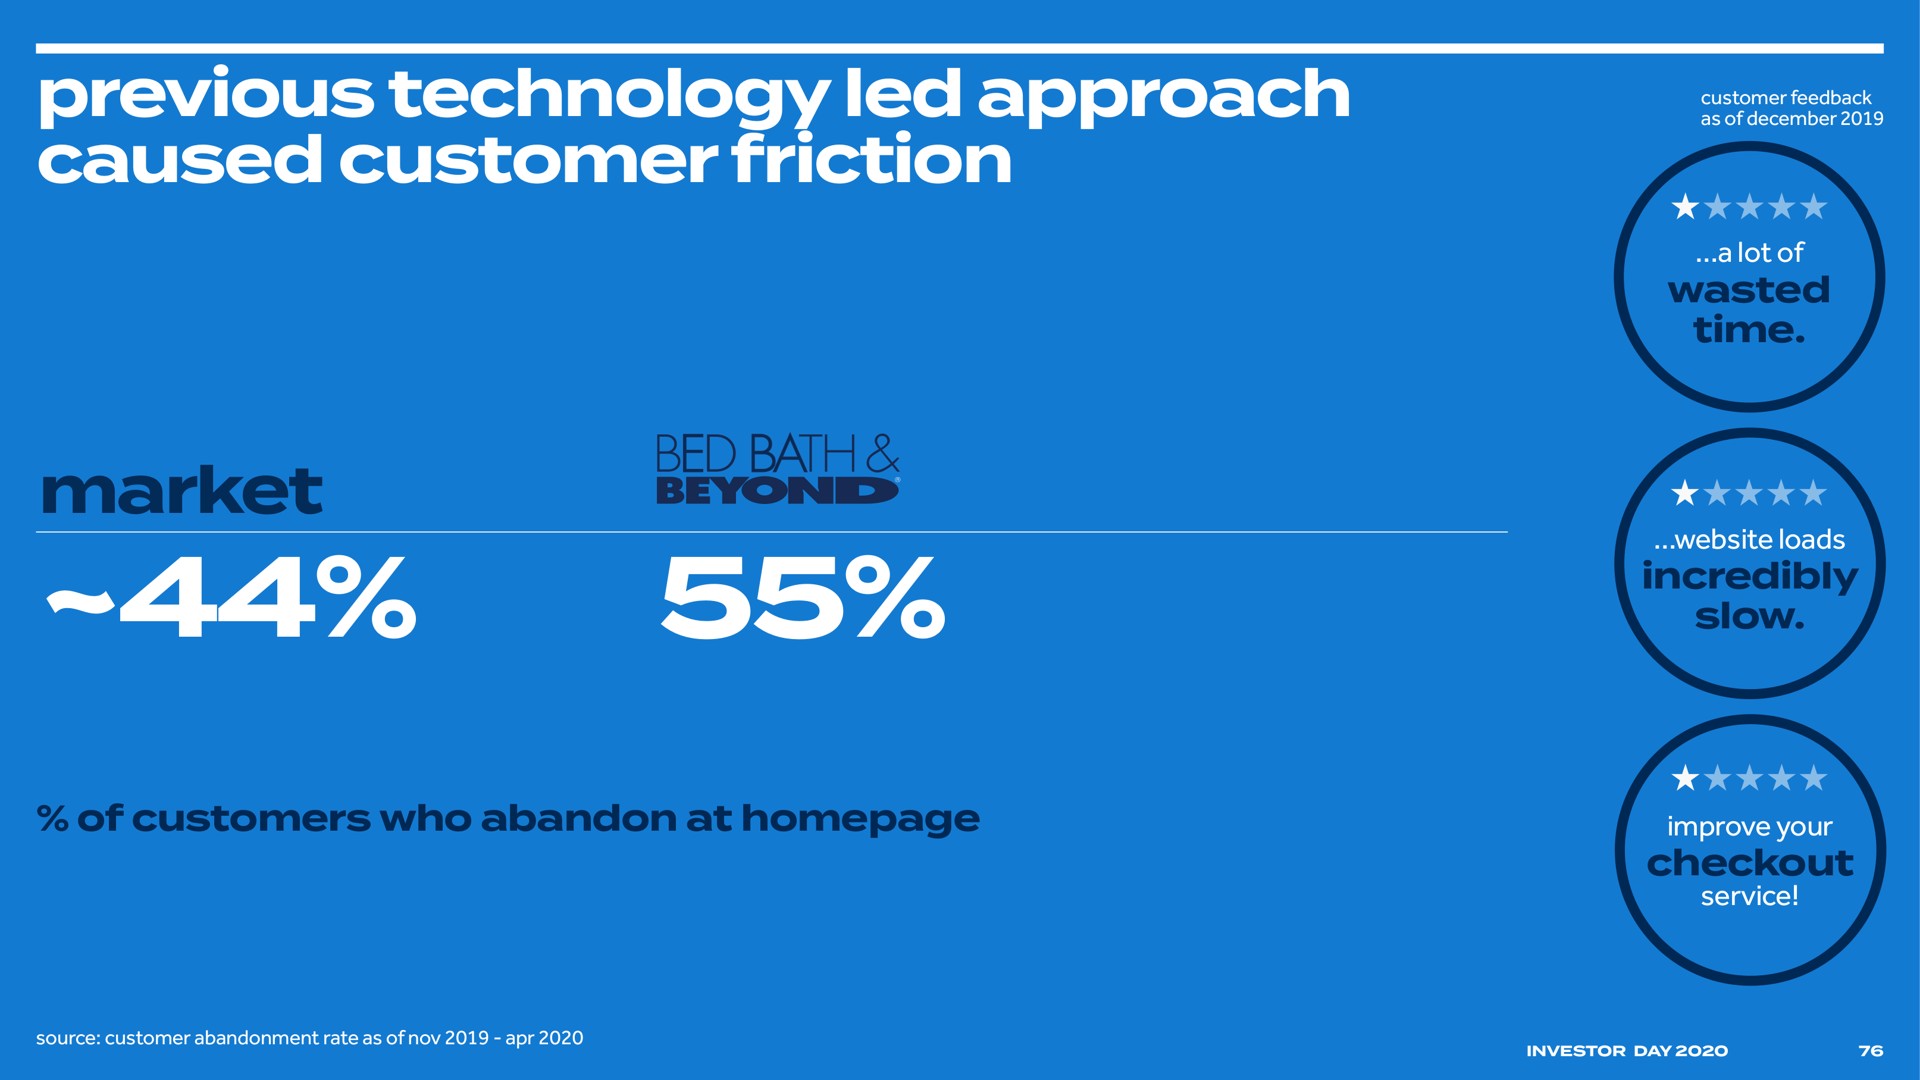 previous technology led approach caused customer friction market | Bed Bath & Beyond